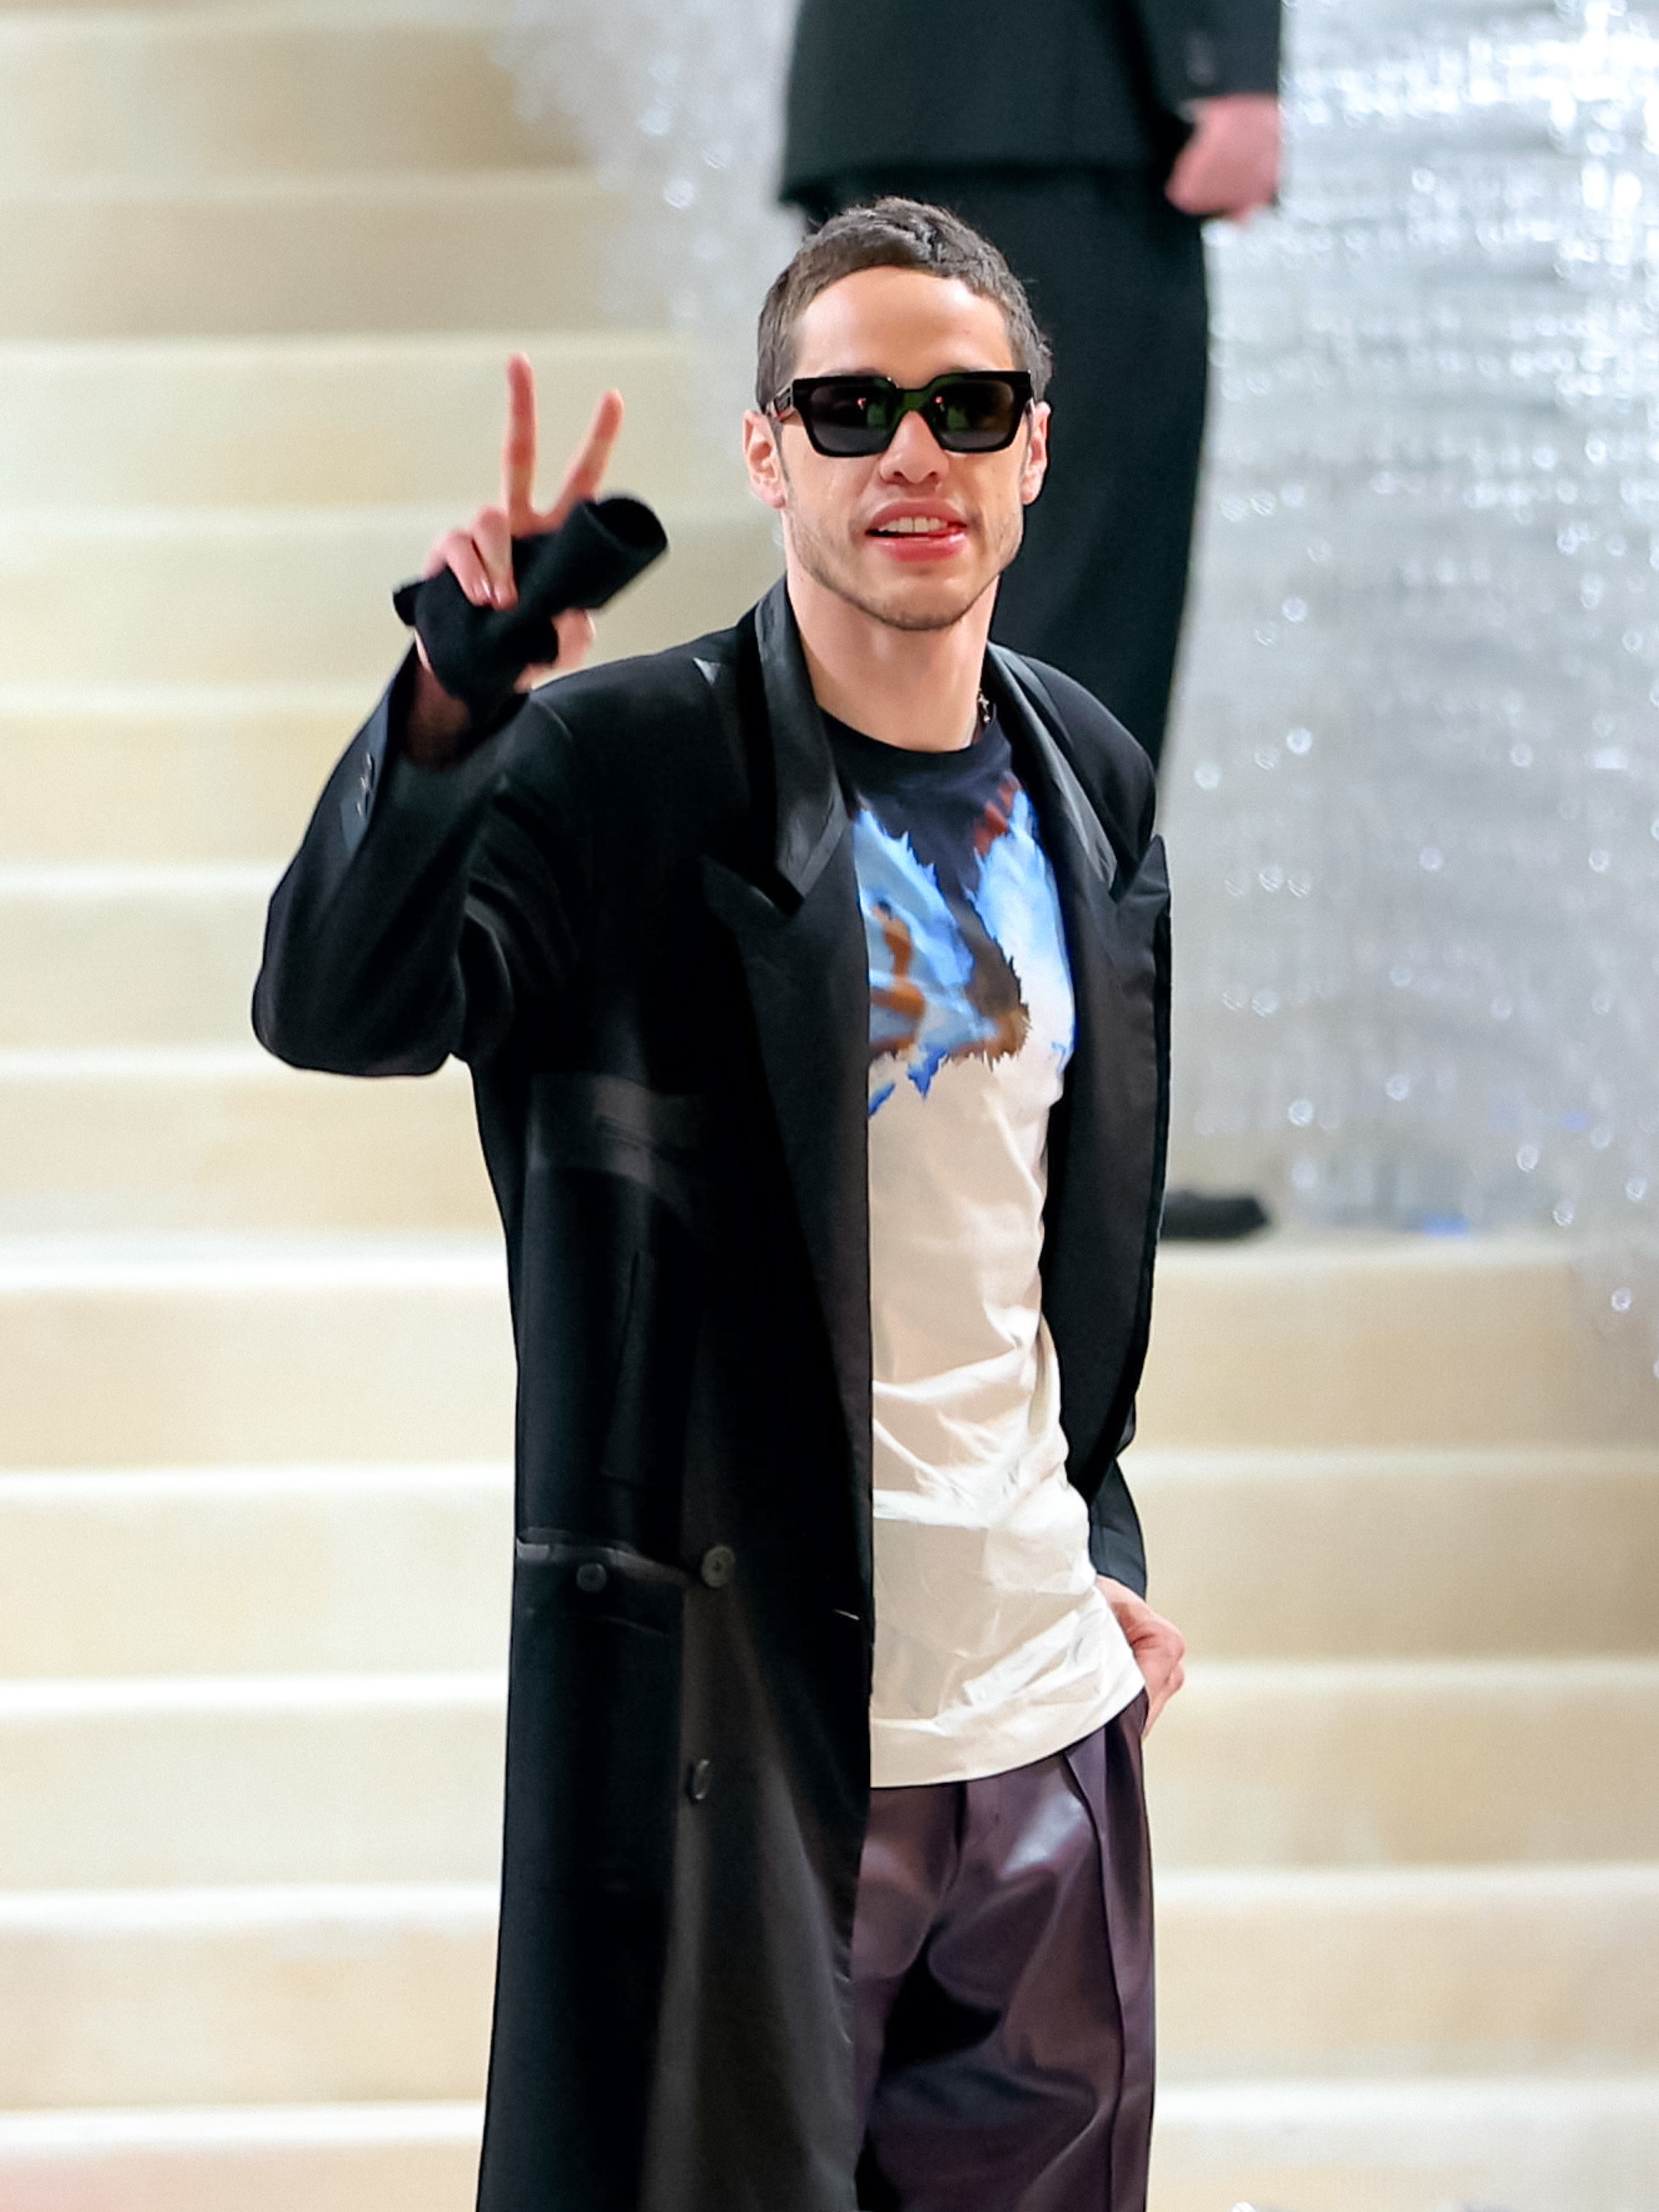 Pete giving a peace sign on stairs